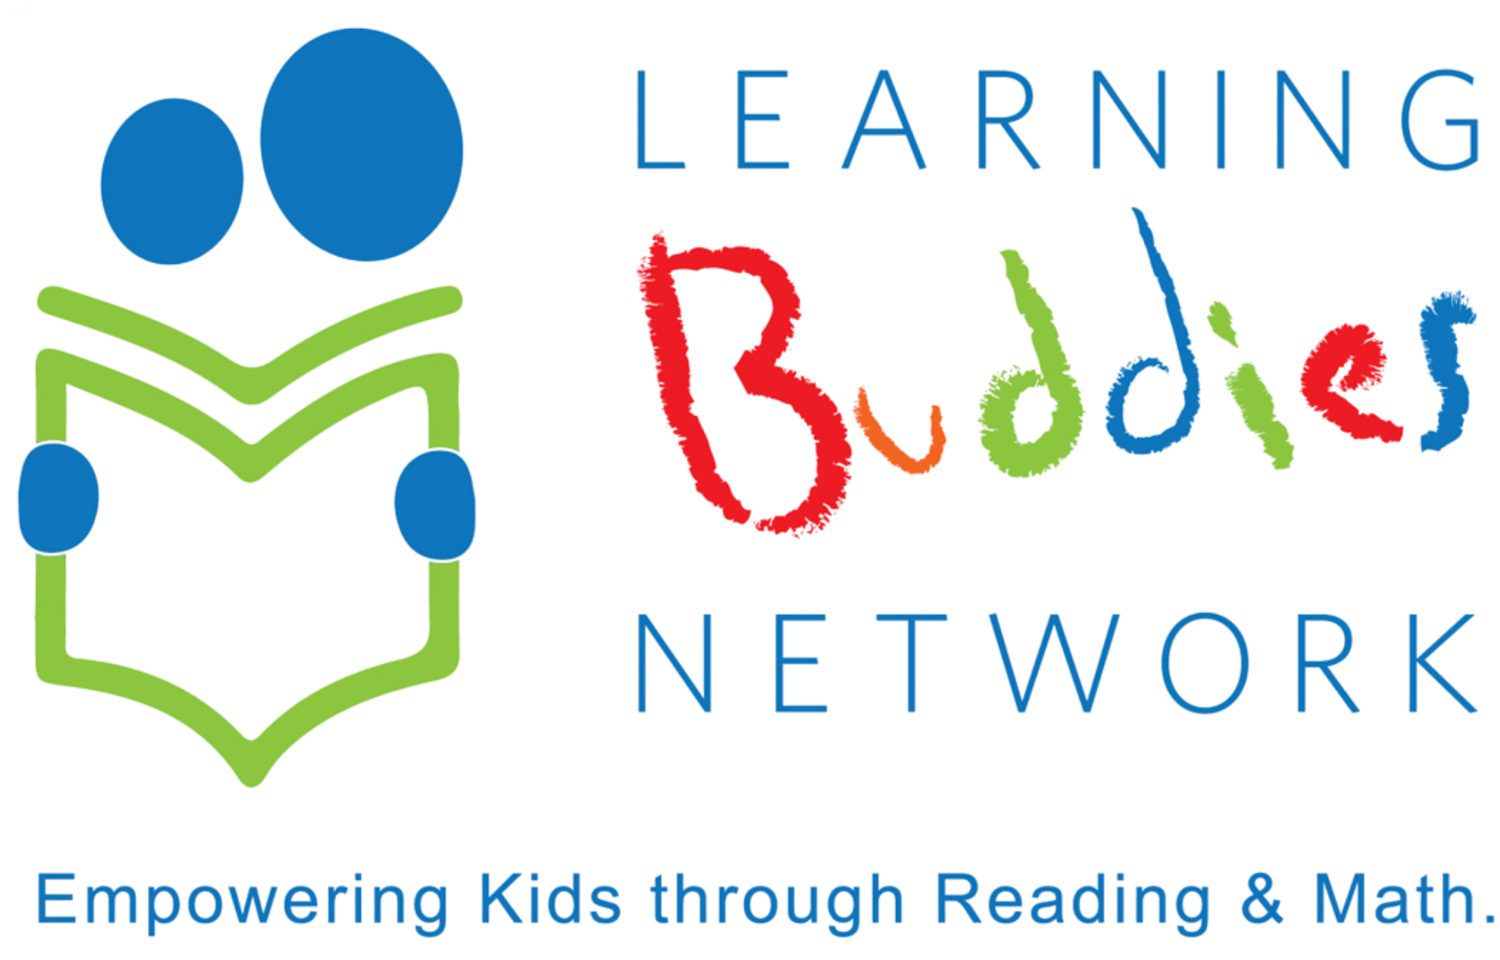 Learning Buddies Network